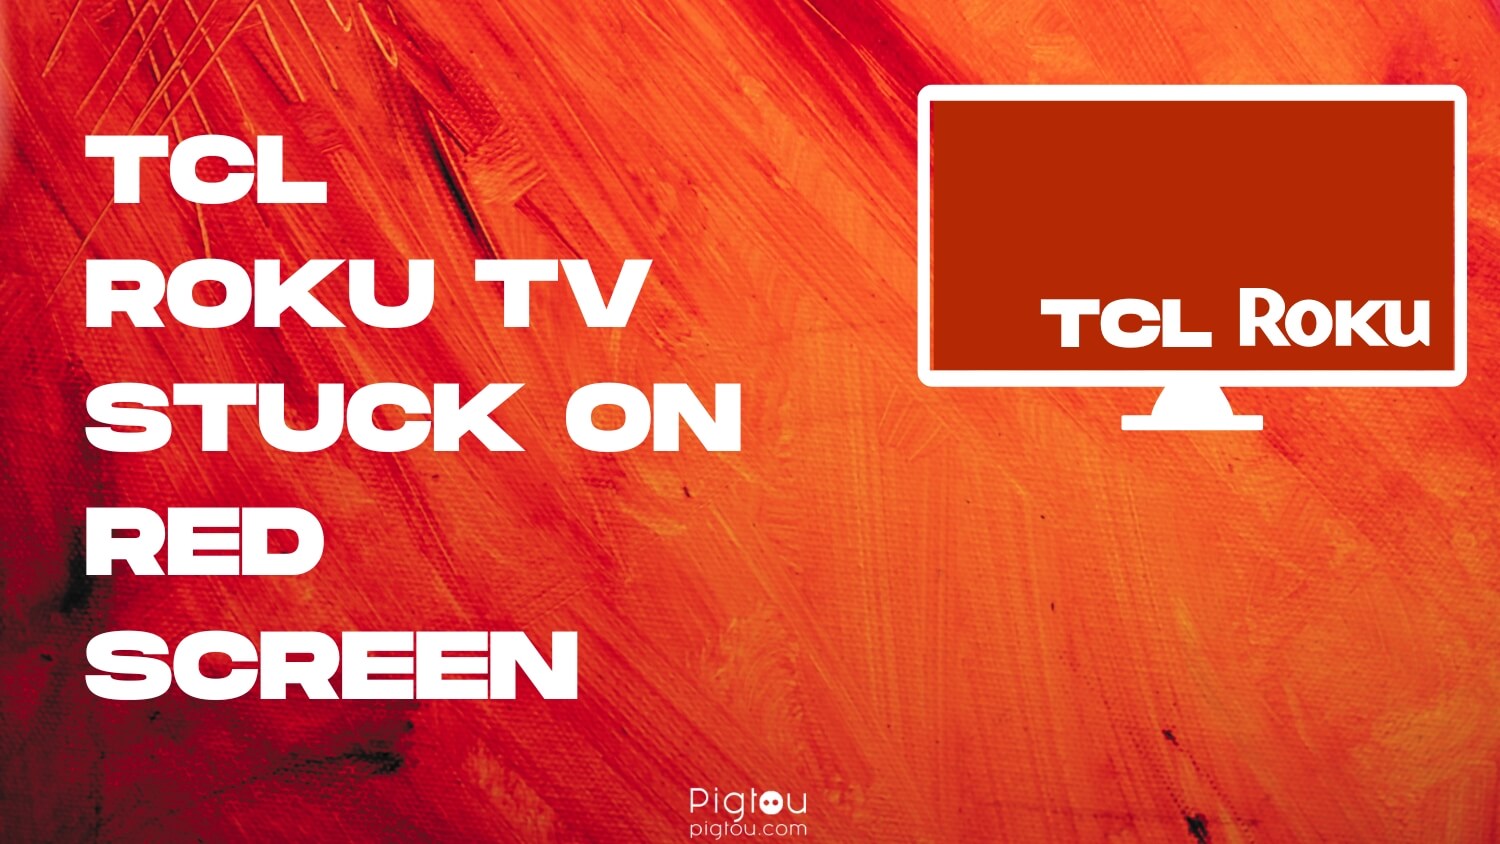 TCL Roku TV Stuck on Red Screen [HERE'S THE FIX!]